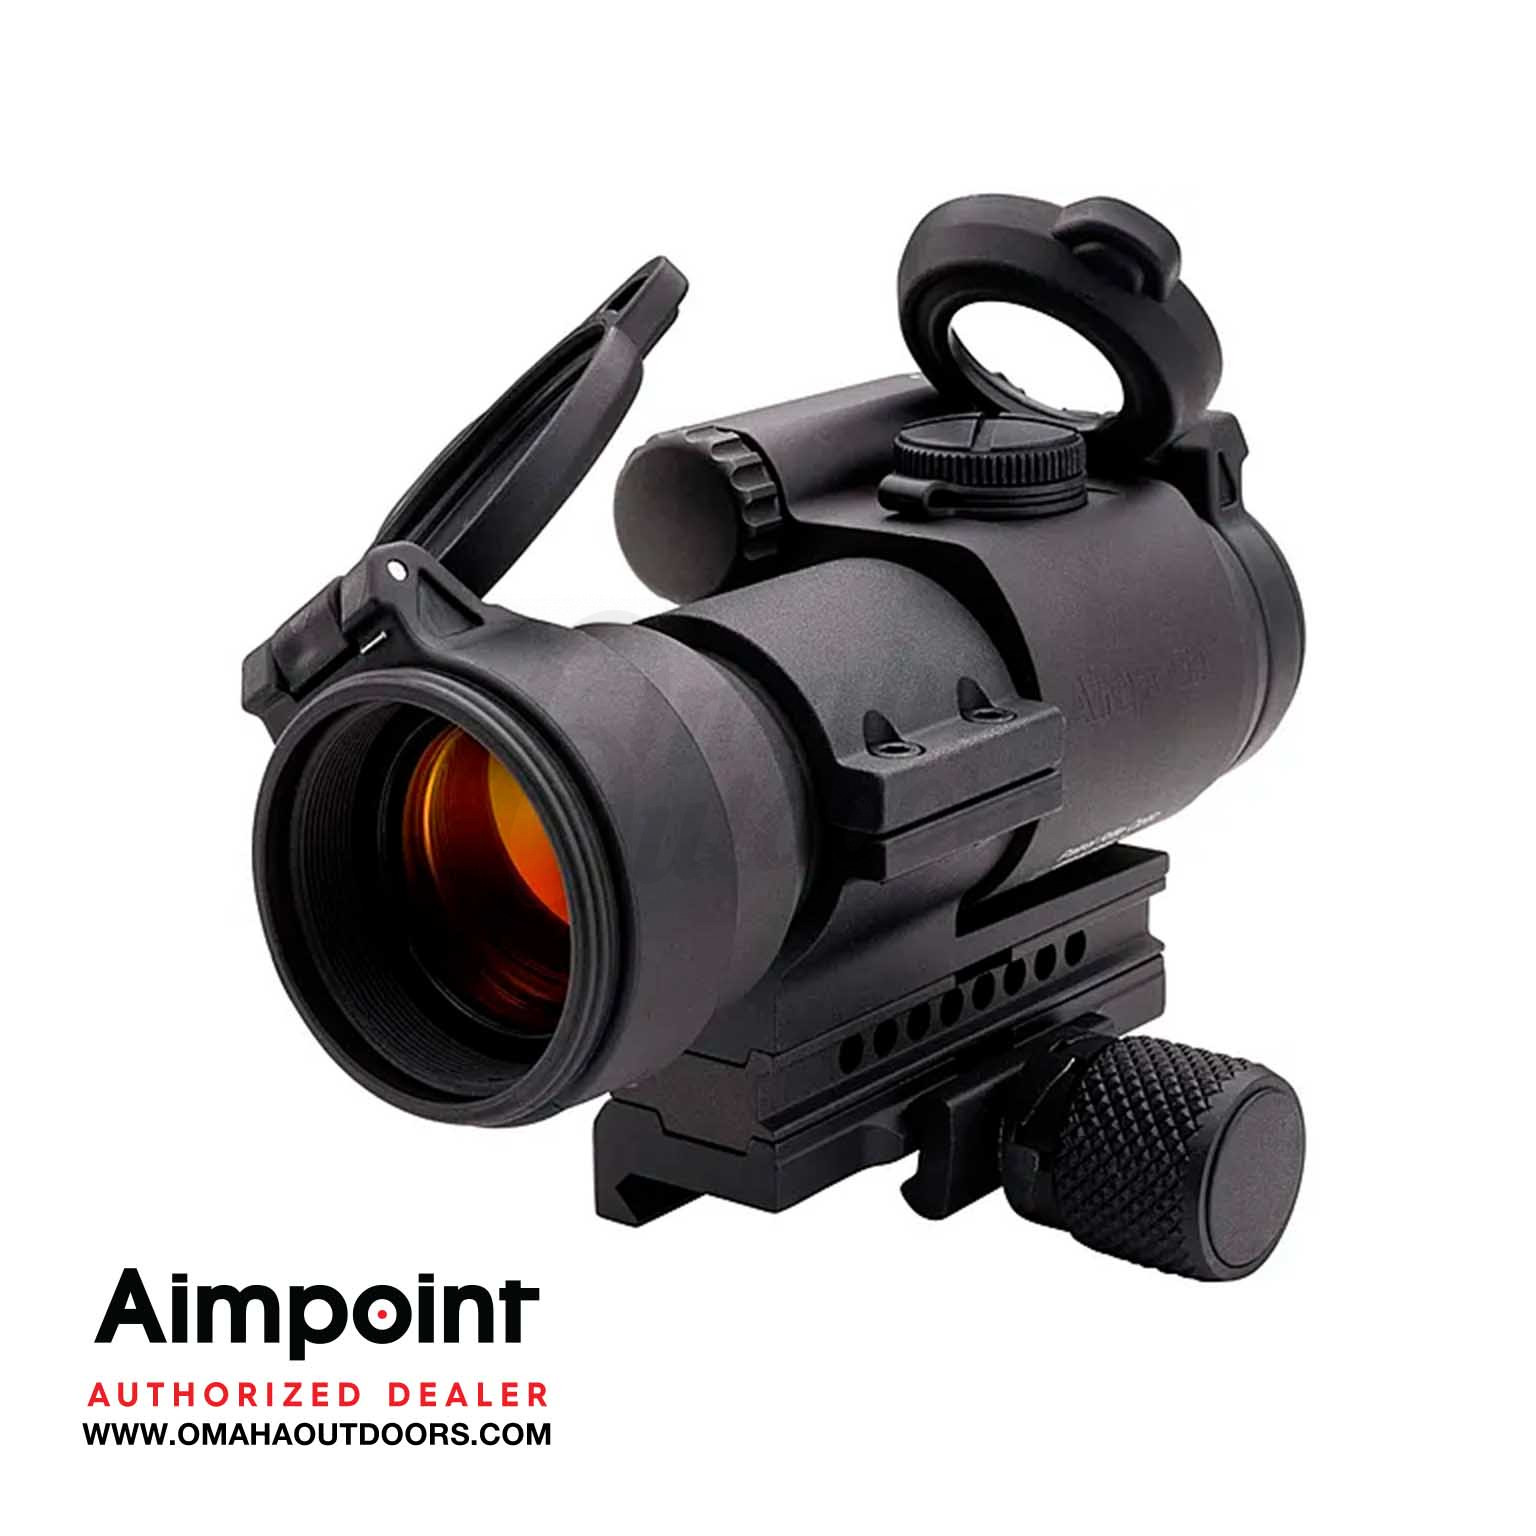 Aimpoint Pro Red Dot - Primary Weapons Systems